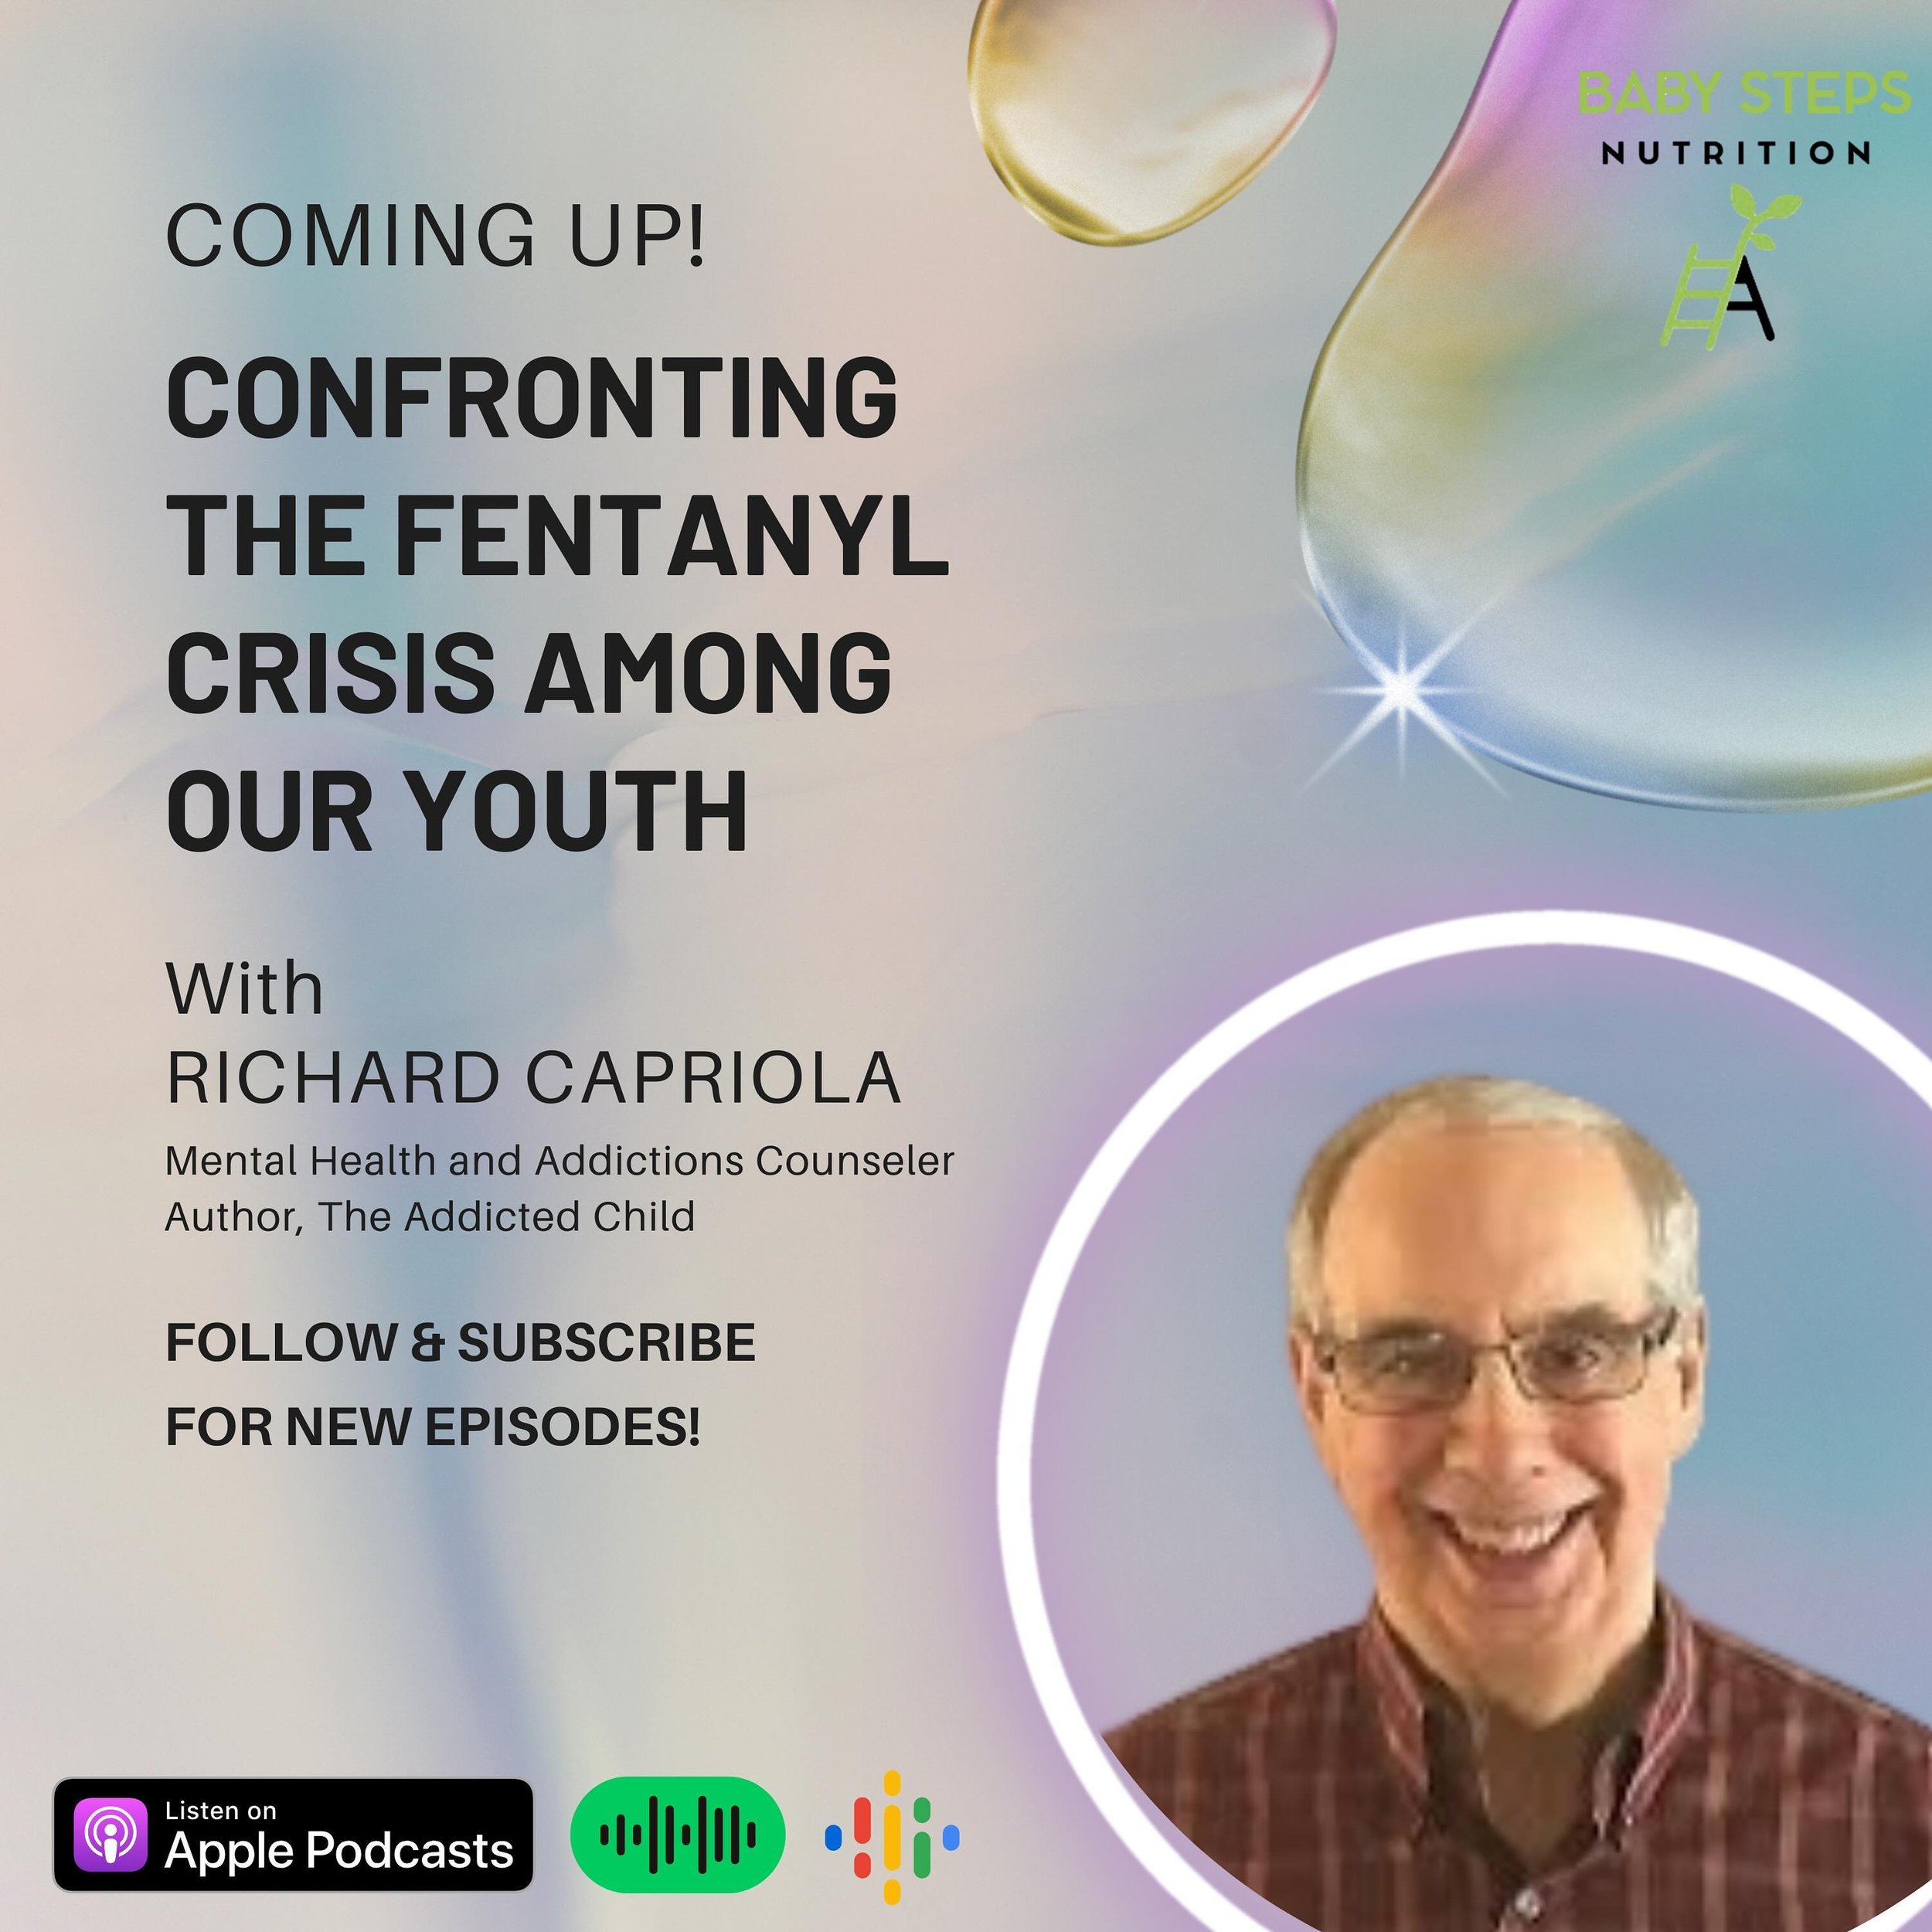 Richard Capriola will be back on the Baby Steps Nutrition Podcast, this time diving into the critical topic of fentanyl use among youth and what parents, caregivers, and educators need to know⚠️

🎧Make sure to subscribe so you don&rsquo;t miss this 